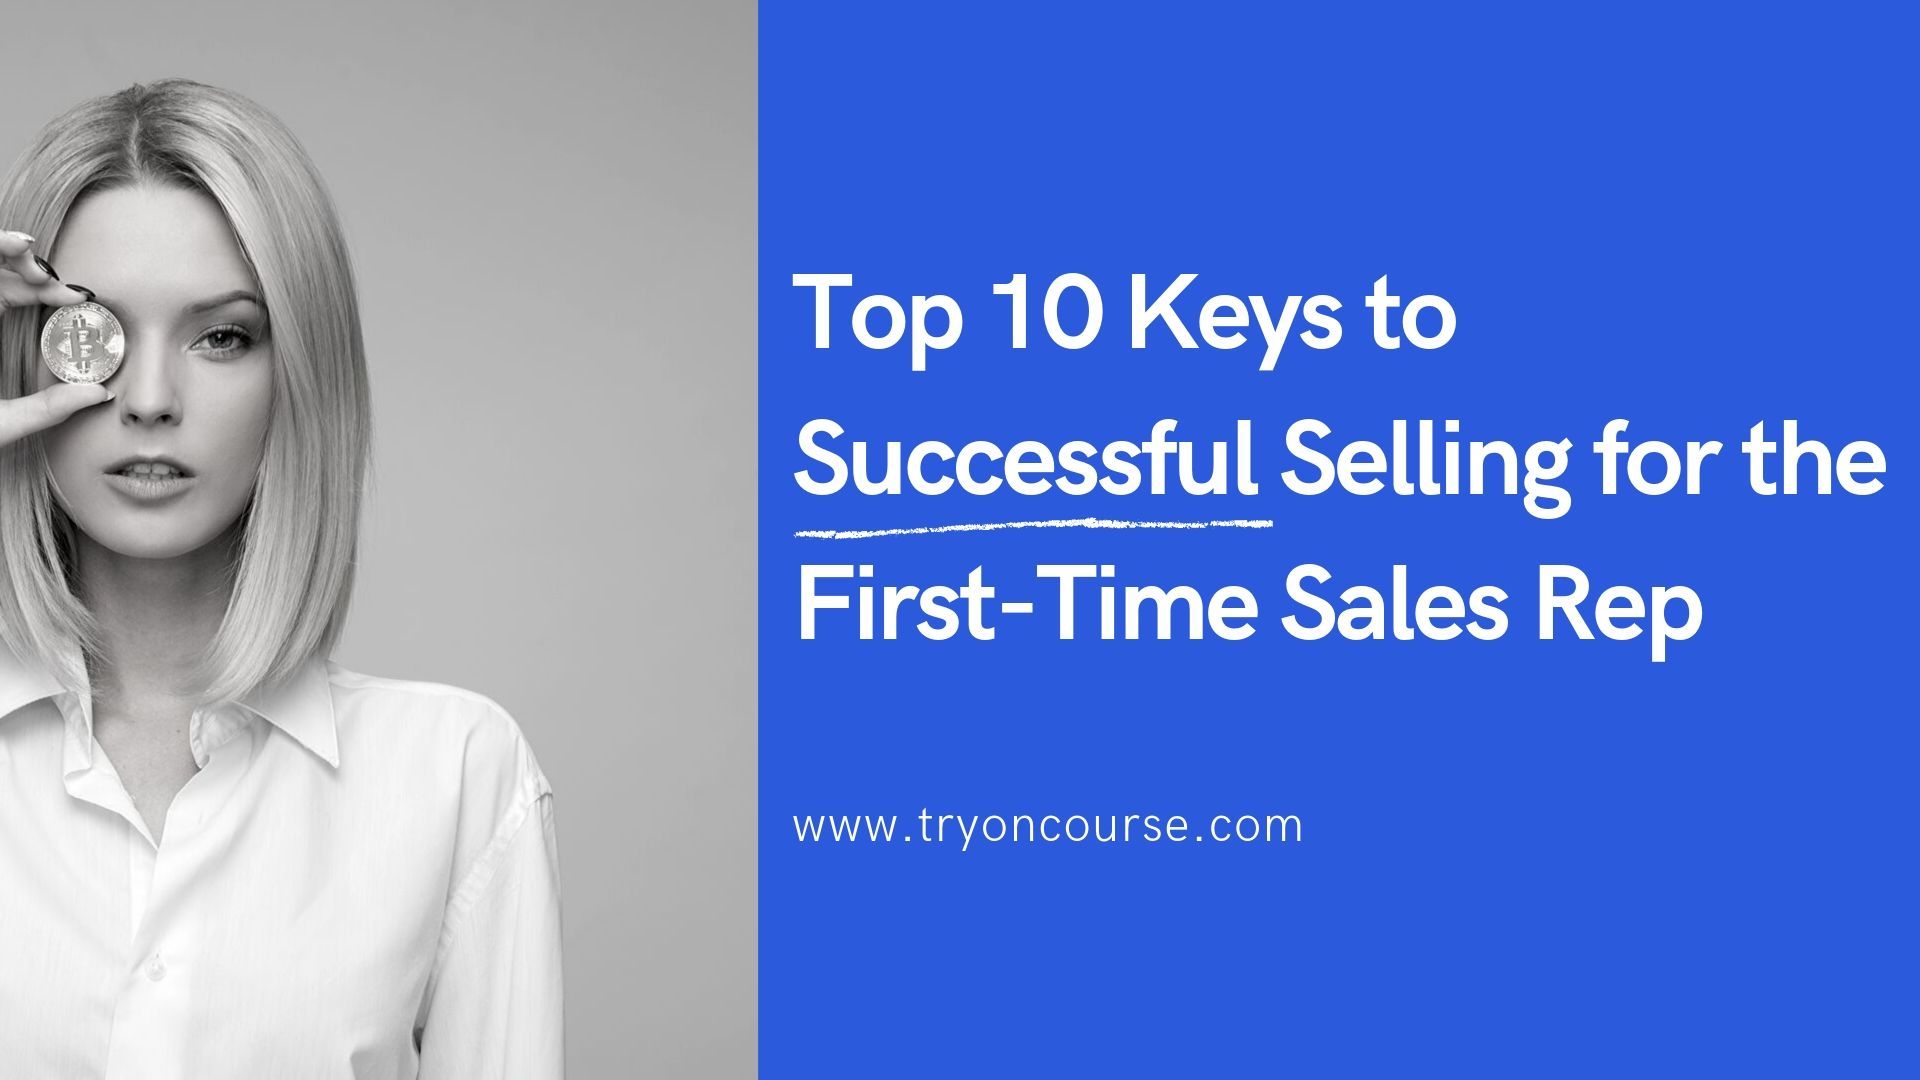 Top 10 Keys to Successful Selling for the First-Time Sales Rep